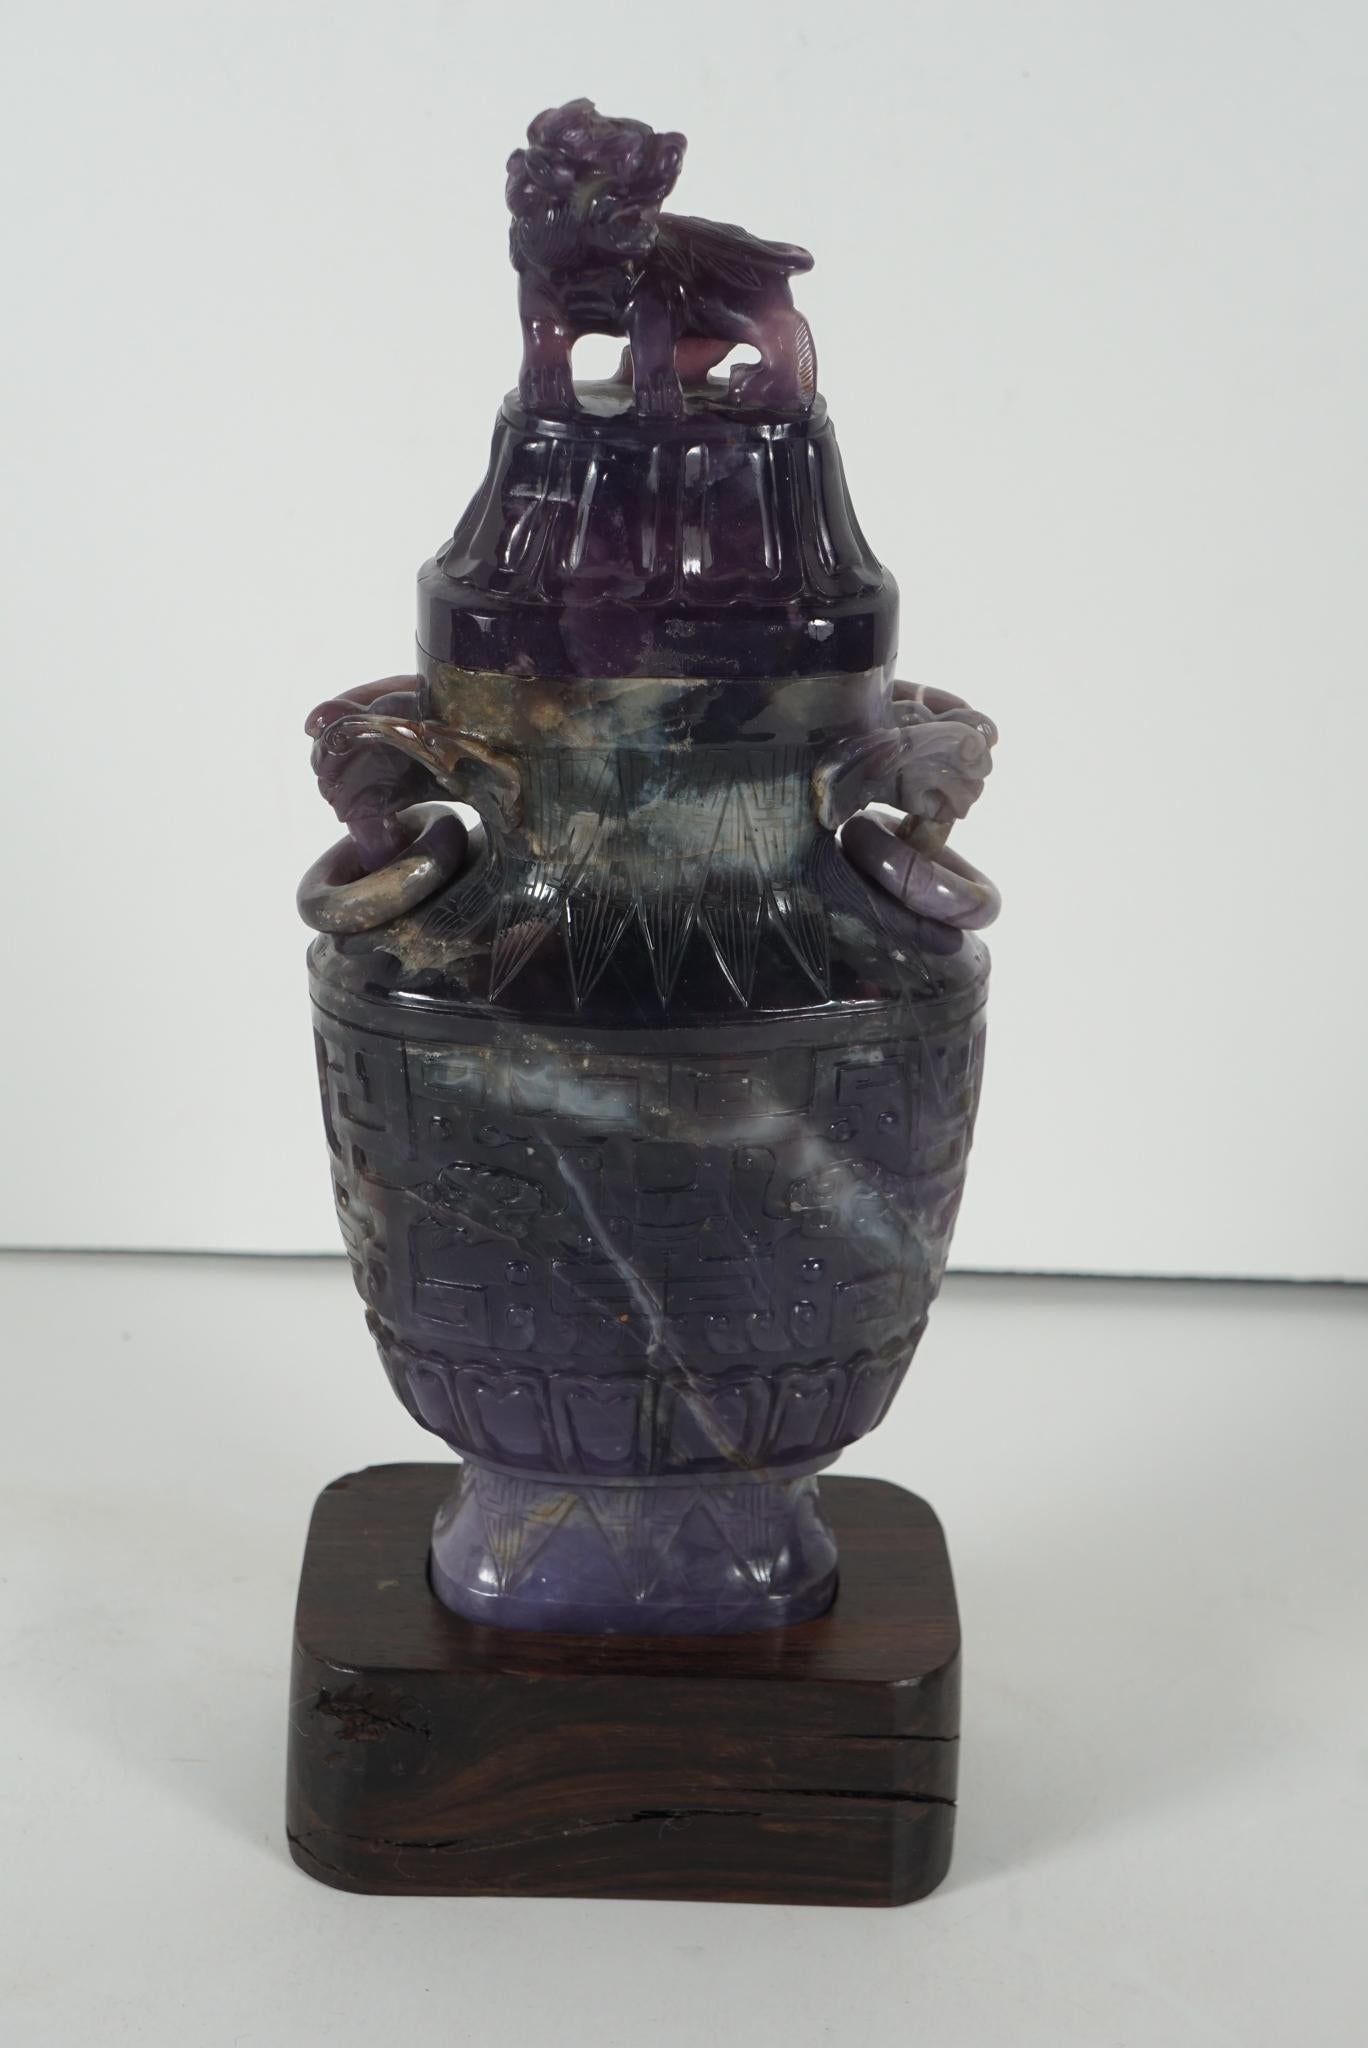 This urn, while archaistic in shape, generally is far more typical of 18th and 19th century specialty carved hardstone vases. The carving in rich veined amethyst quartz was done circa 1930-1940 and is dominated on the lid with a Kylin or mythical